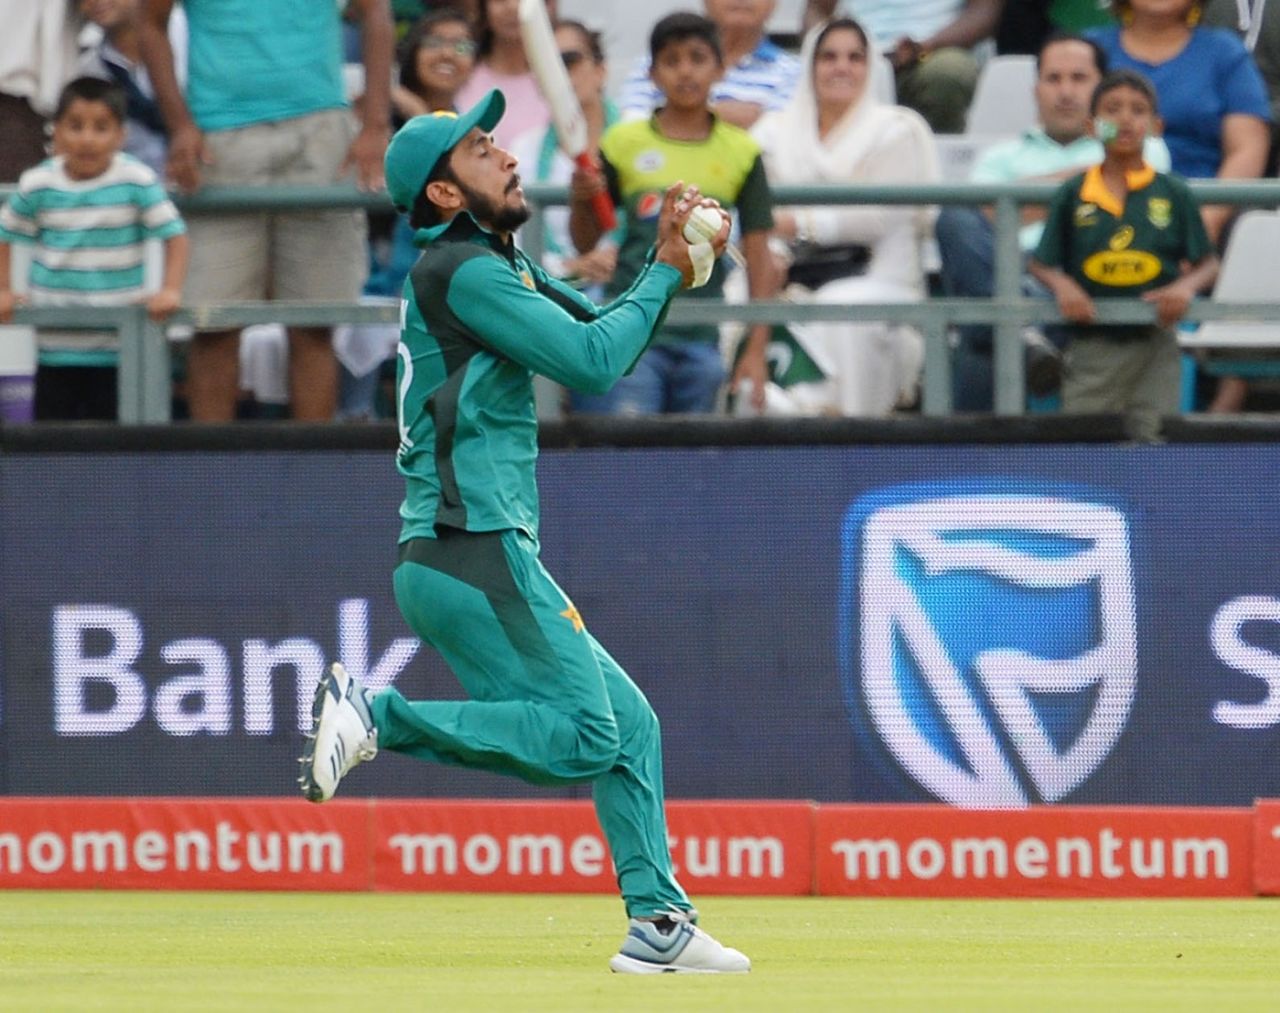 Substitute fielder Hasan Ali holds on to a catch, South Africa v Pakistan, 5th ODI, Cape Town, January 30, 2019